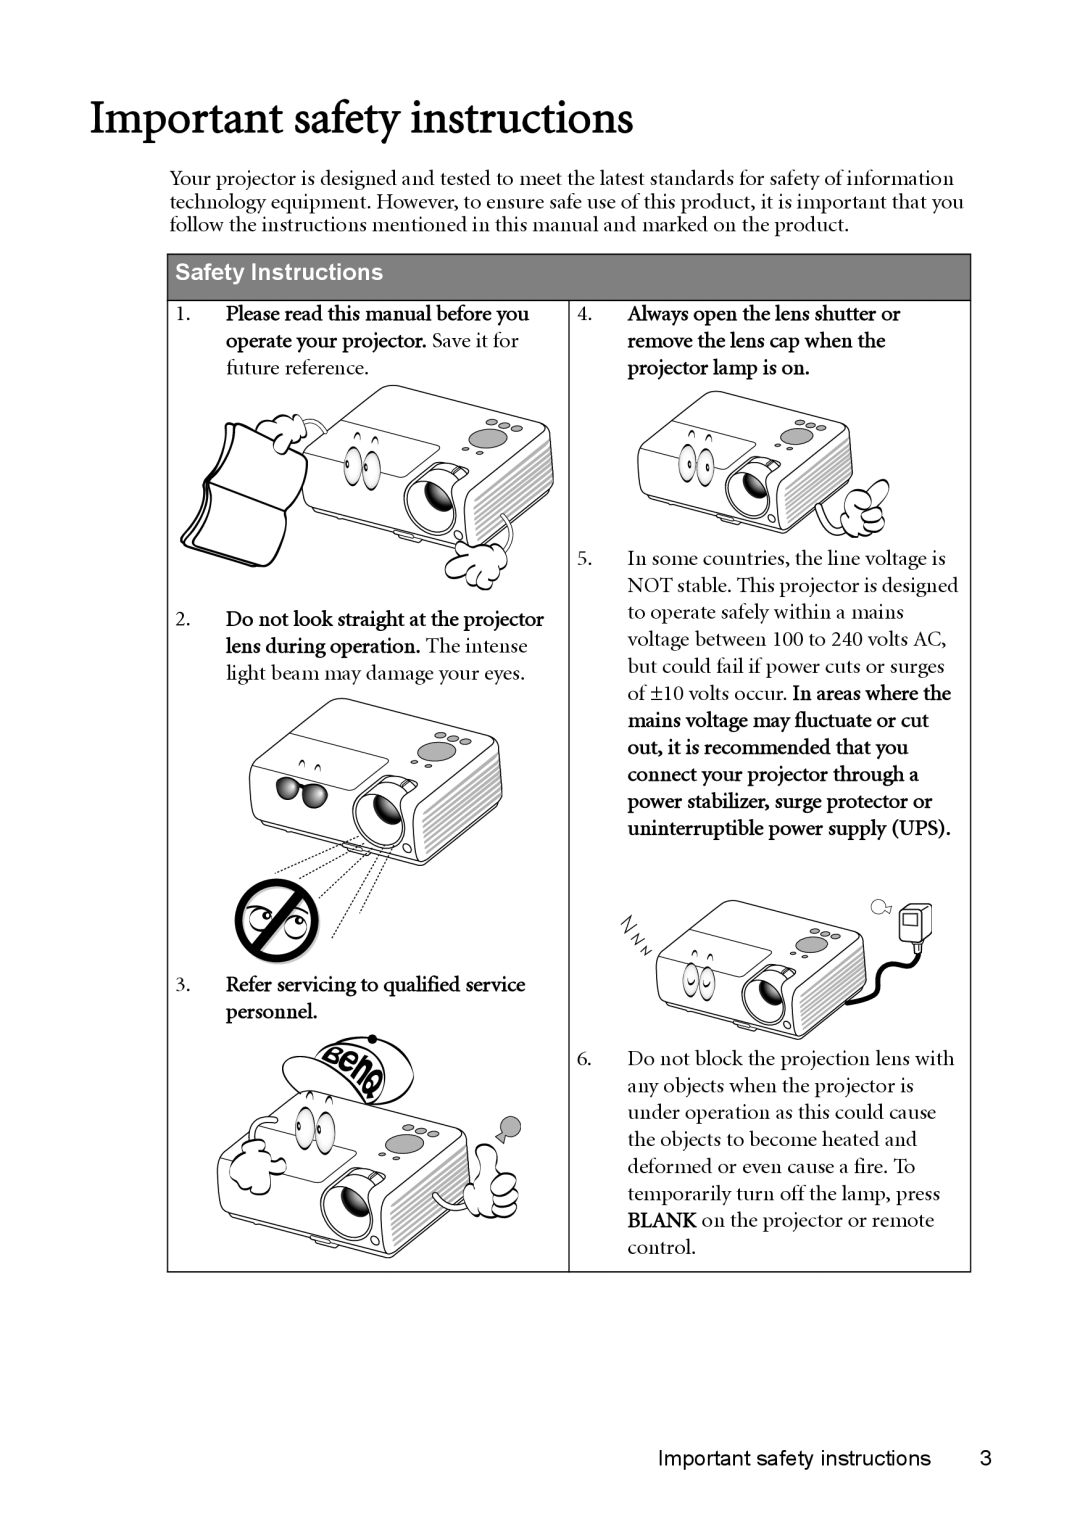 BenQ MX511 Important safety instructions, Safety Instructions, operate your projector. Save it for, future reference 